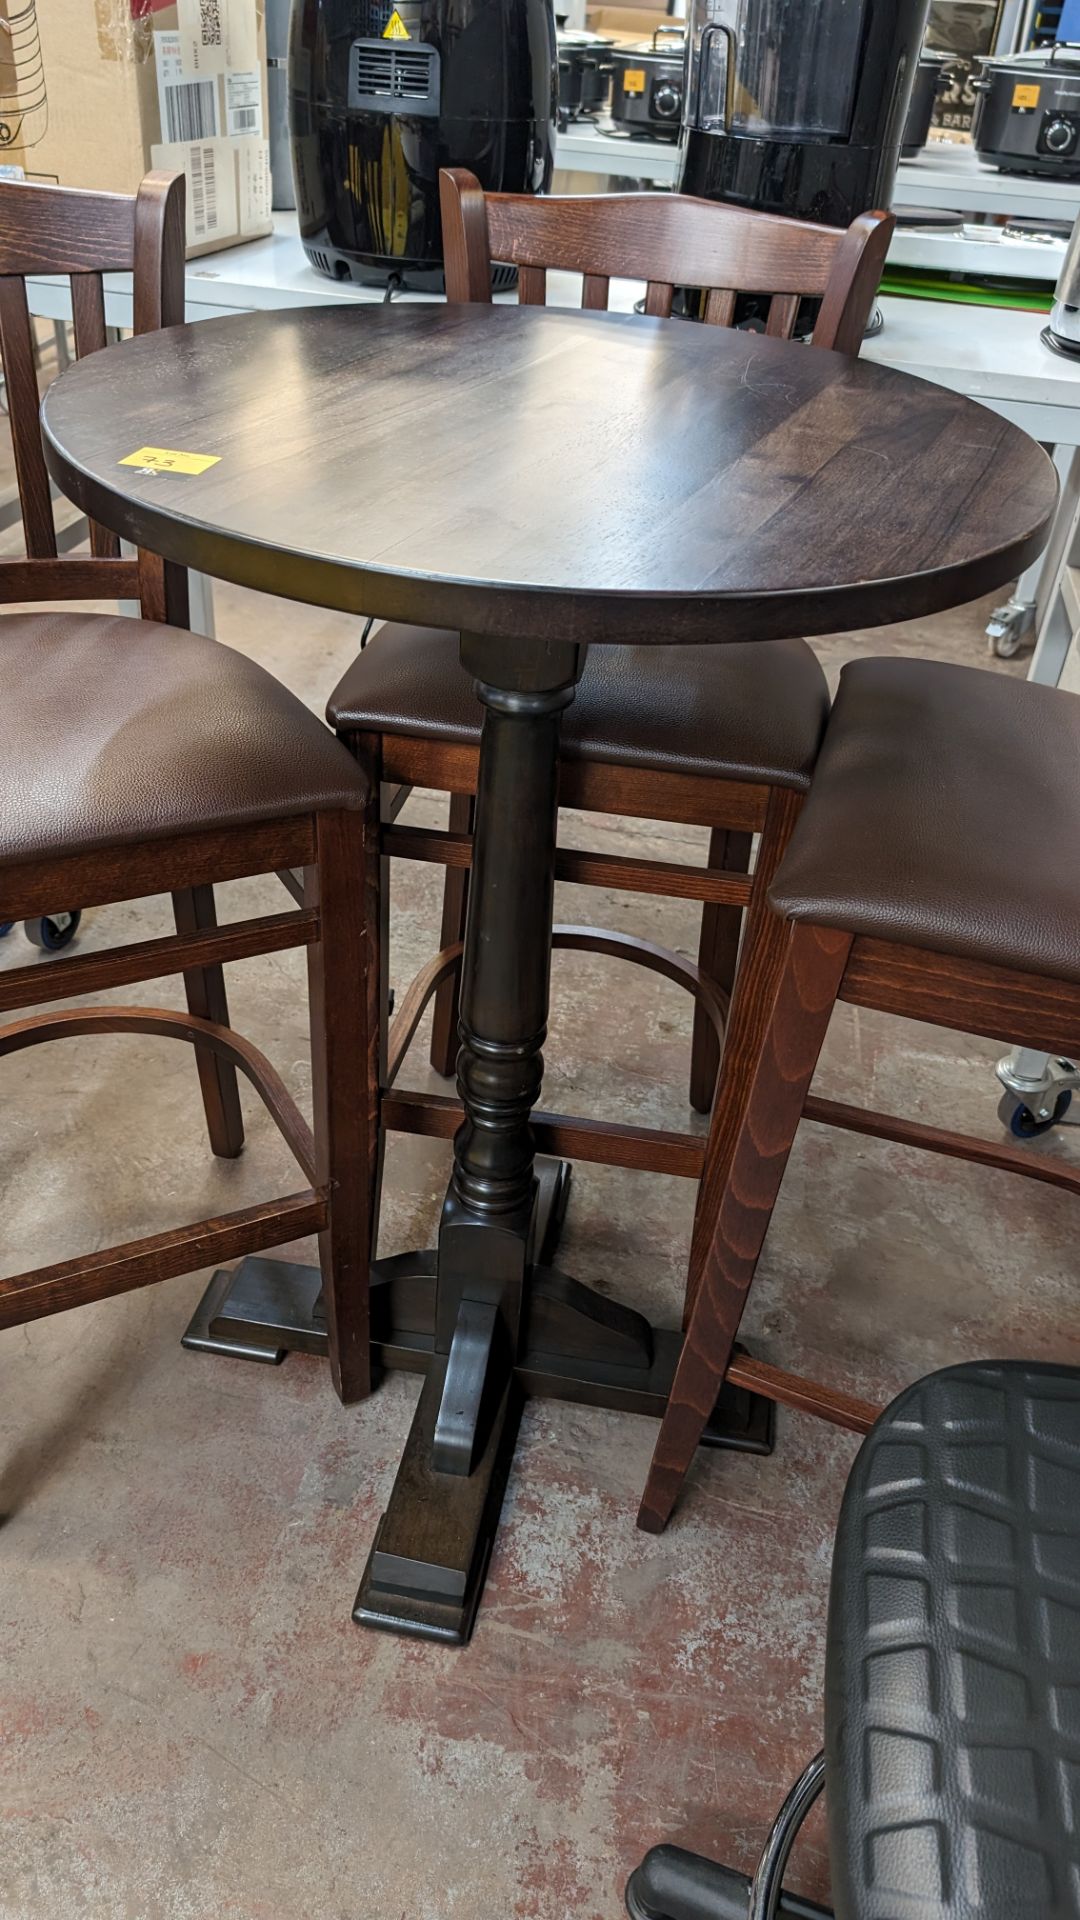 3 off tall single pedestal round bar tables (two different finishes) - Image 2 of 5